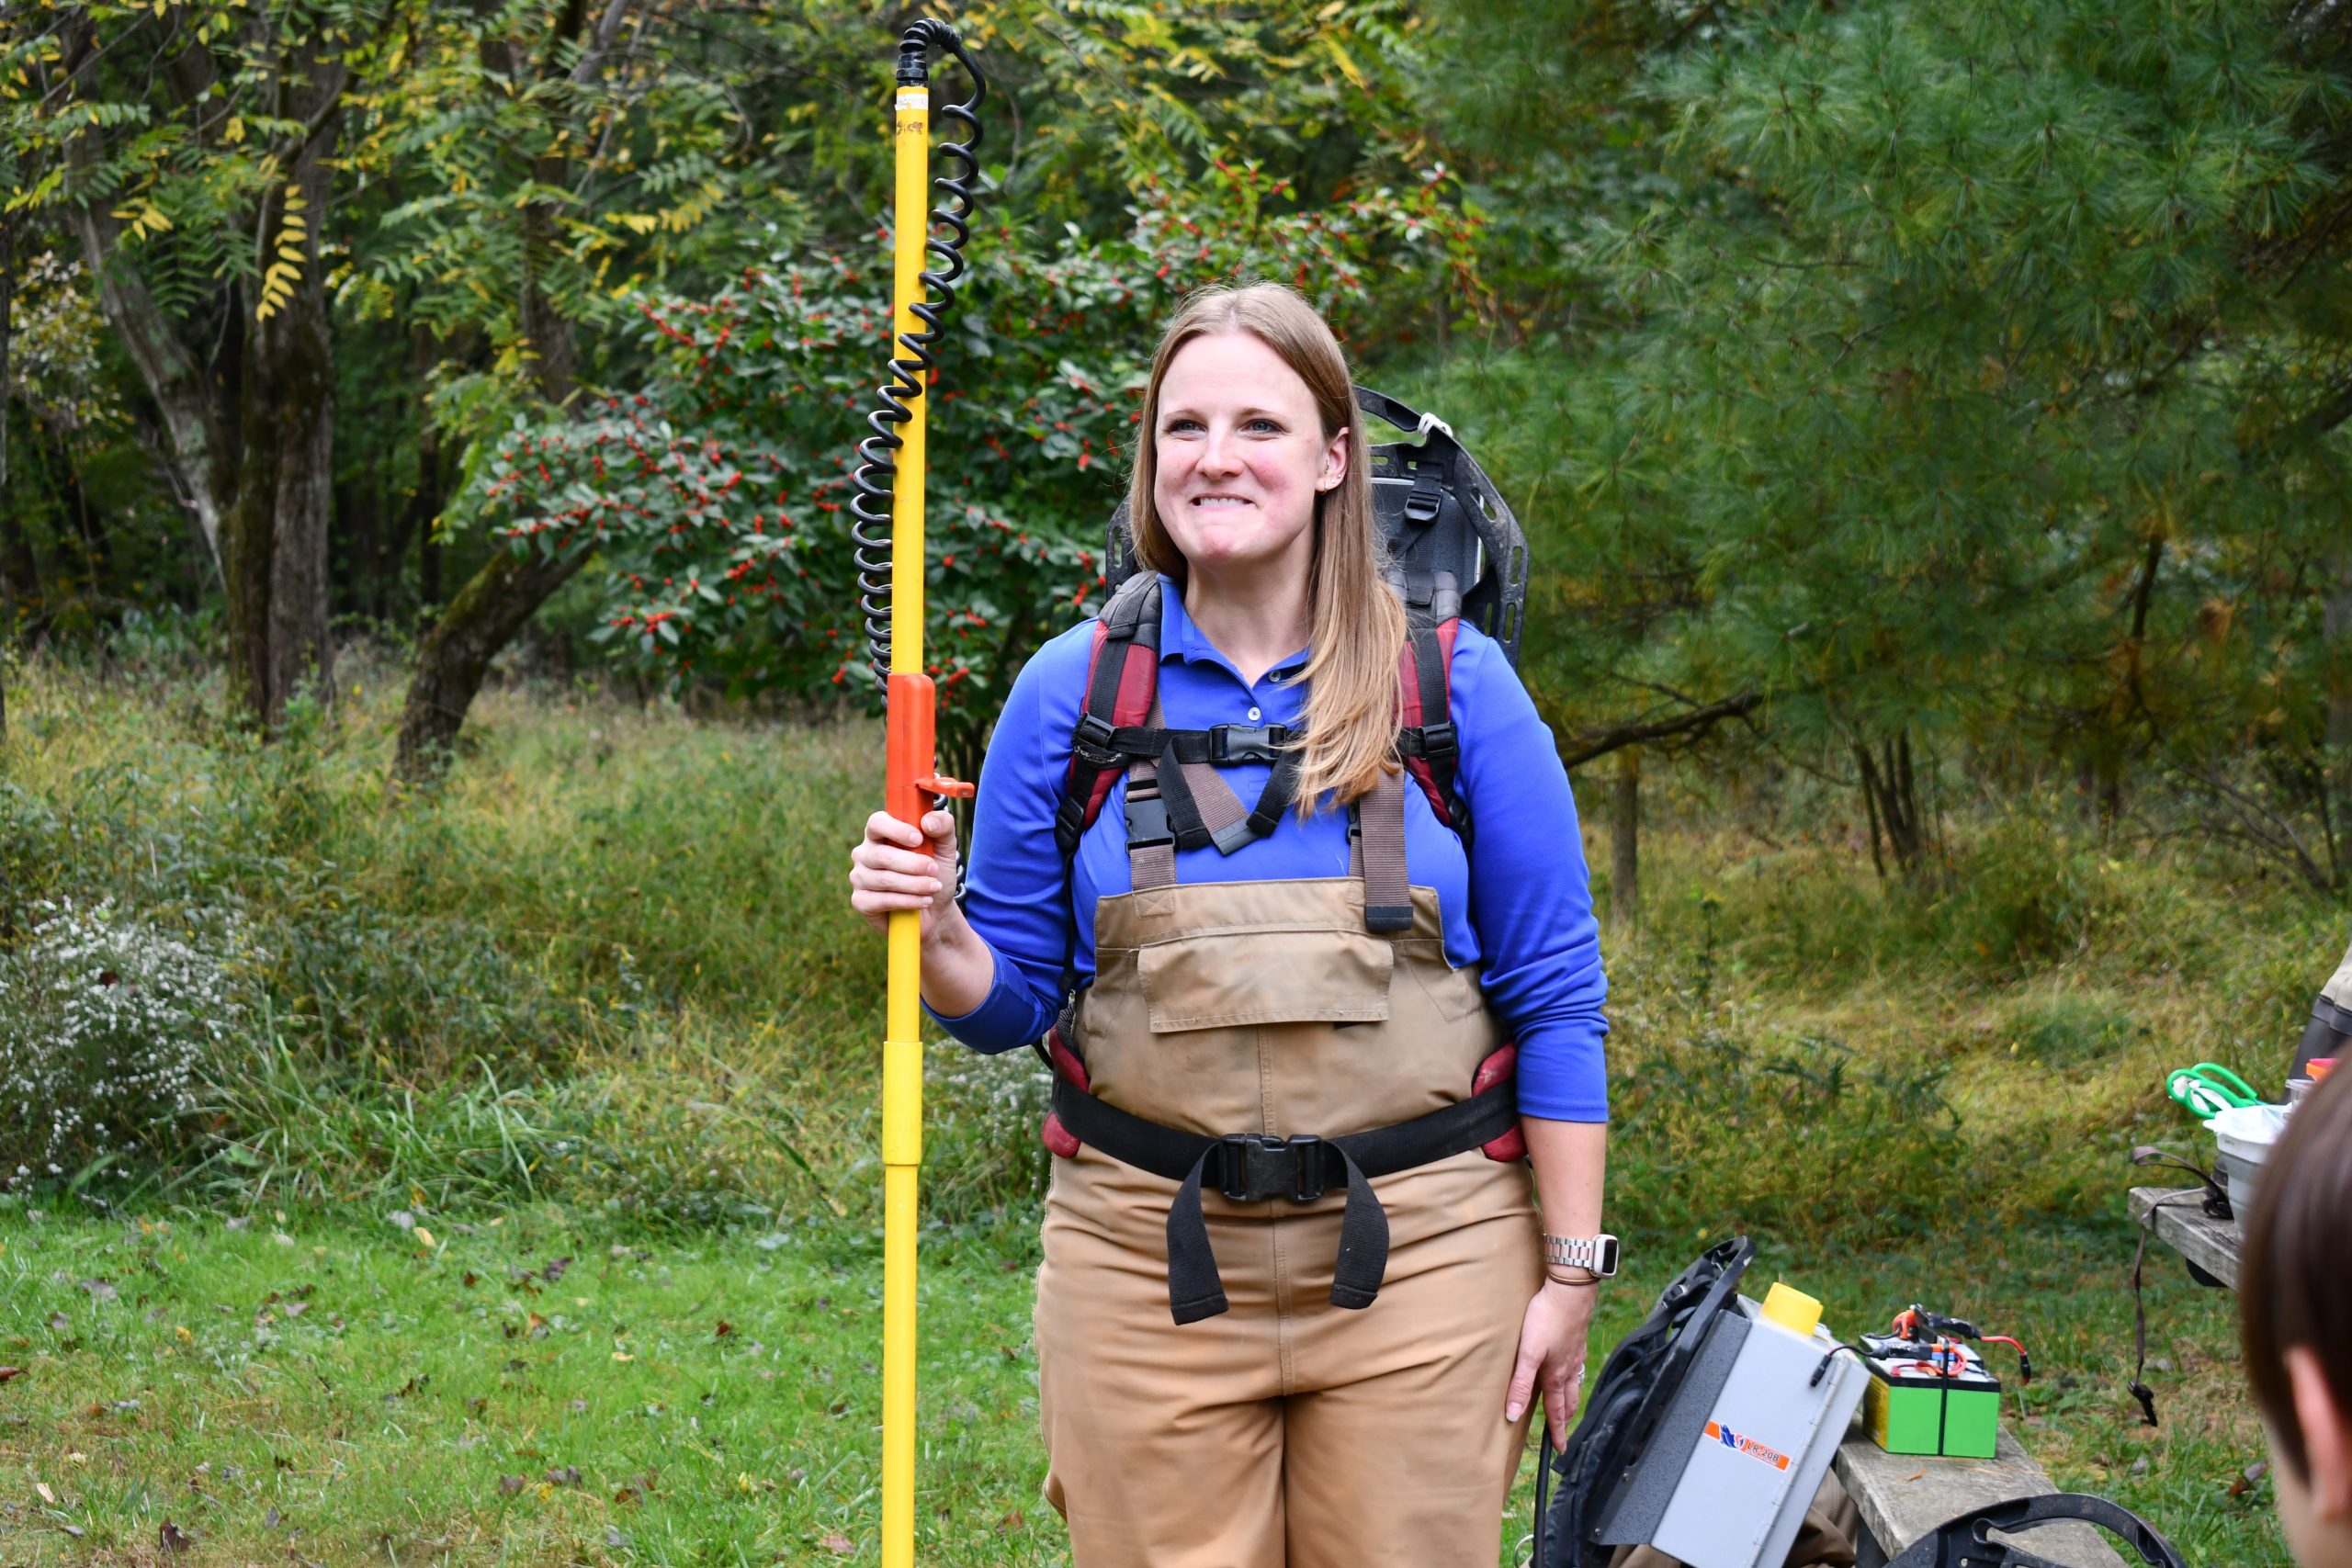 Rachel Gauza Gonert stands in Maydale Nature Center in waders and hold water surveying equipment.